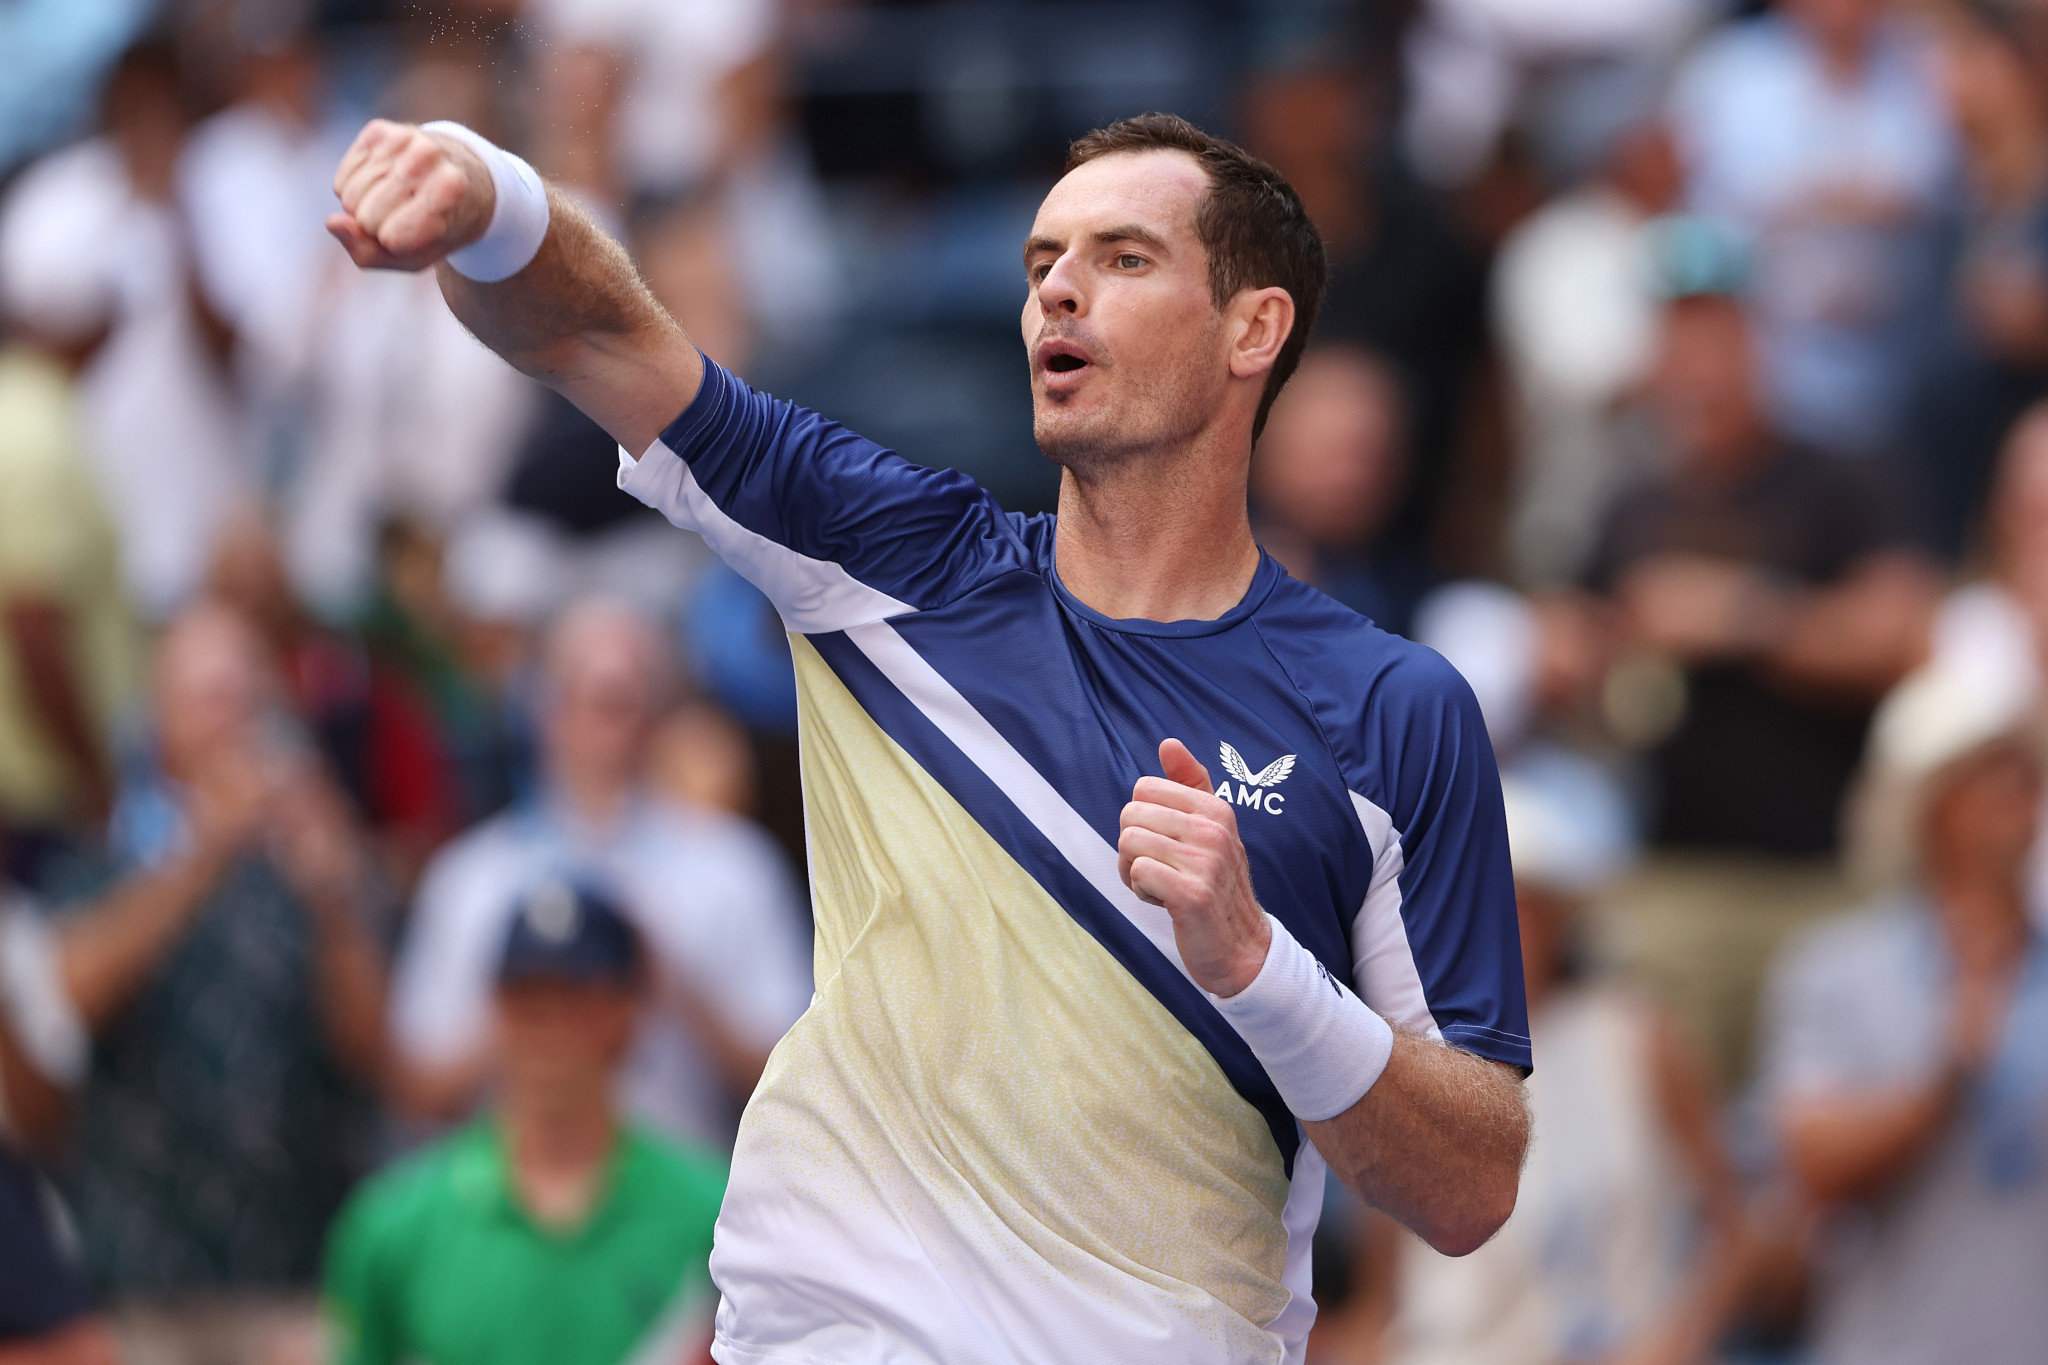 Sir Andy Murray recovered from a set down to beat American Emilio Nava in four sets at the US Open ©Getty Images



